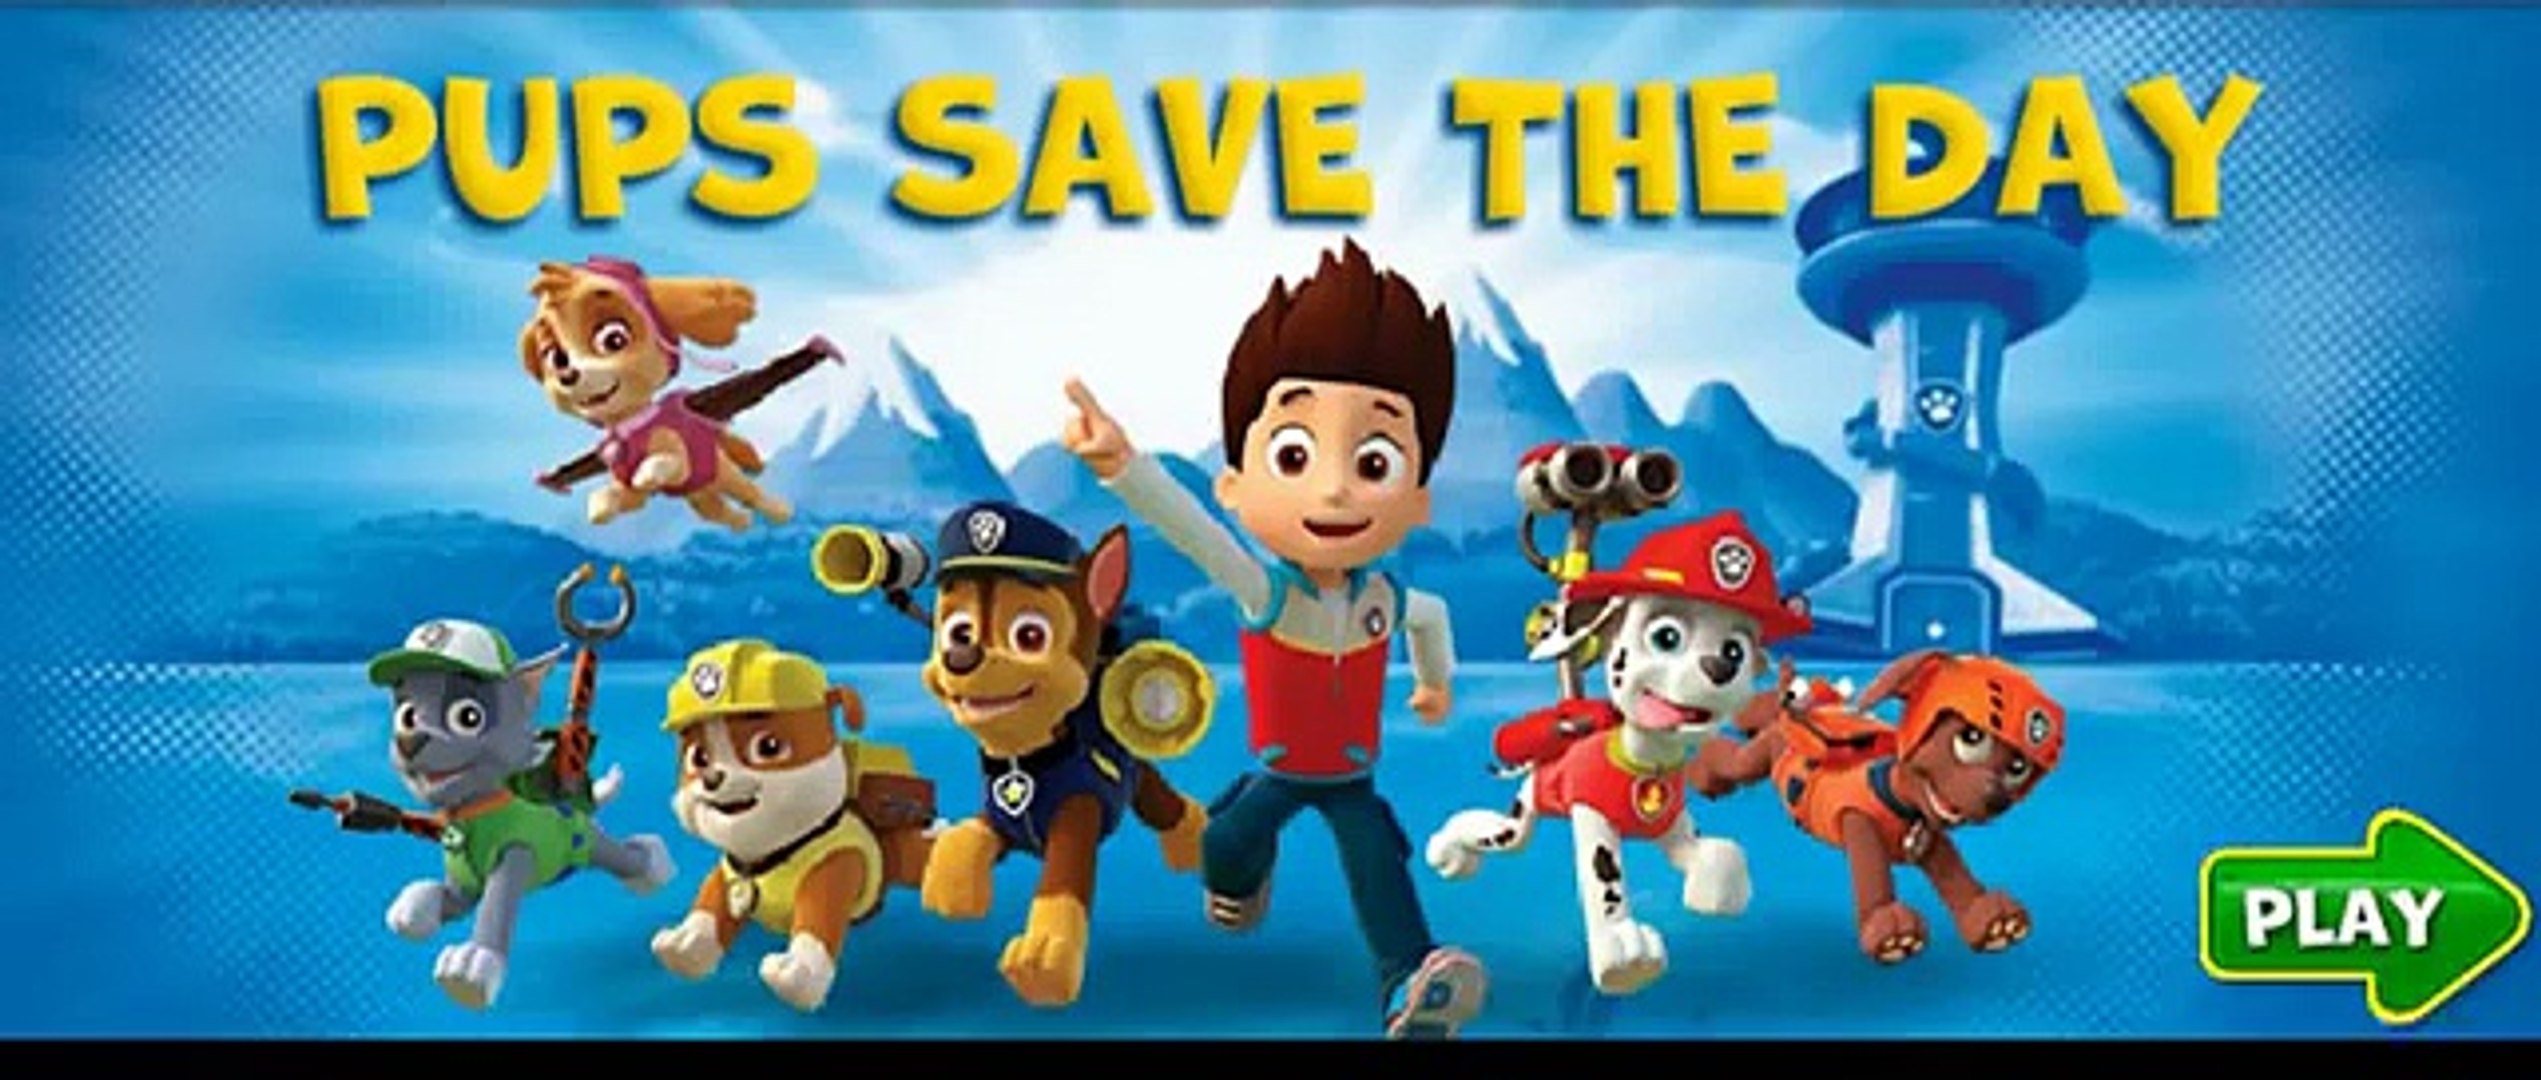 Paw Patrol Game - Paw Patrol Full Episodes Save The Day - Paw Kid Games - Dailymotion Video